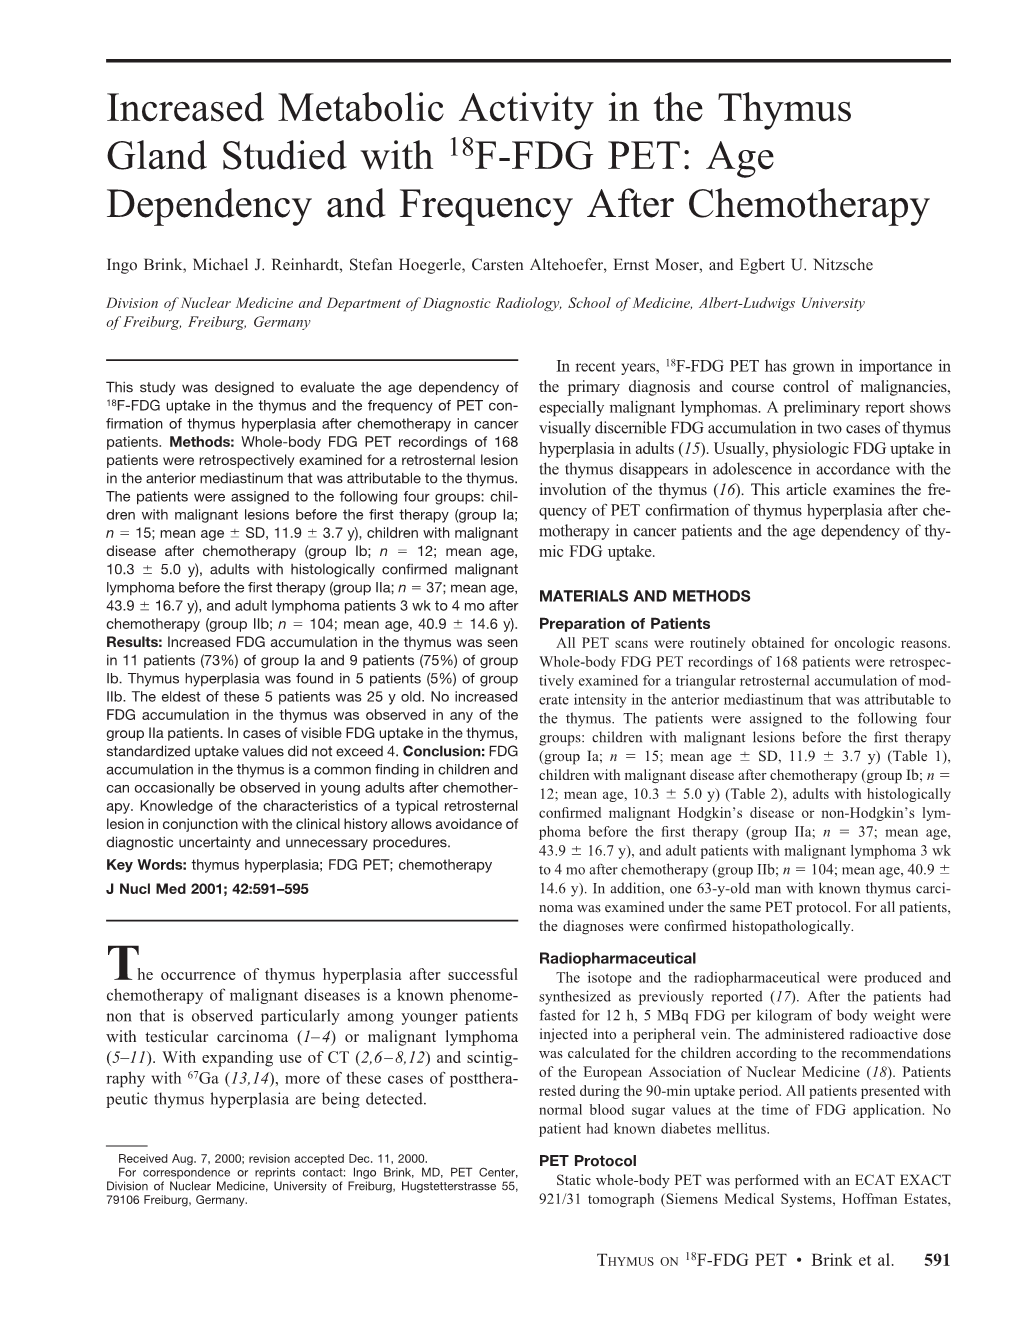 Increased Metabolic Activity in the Thymus Gland Studied with 18F-FDG PET: Age Dependency and Frequency After Chemotherapy